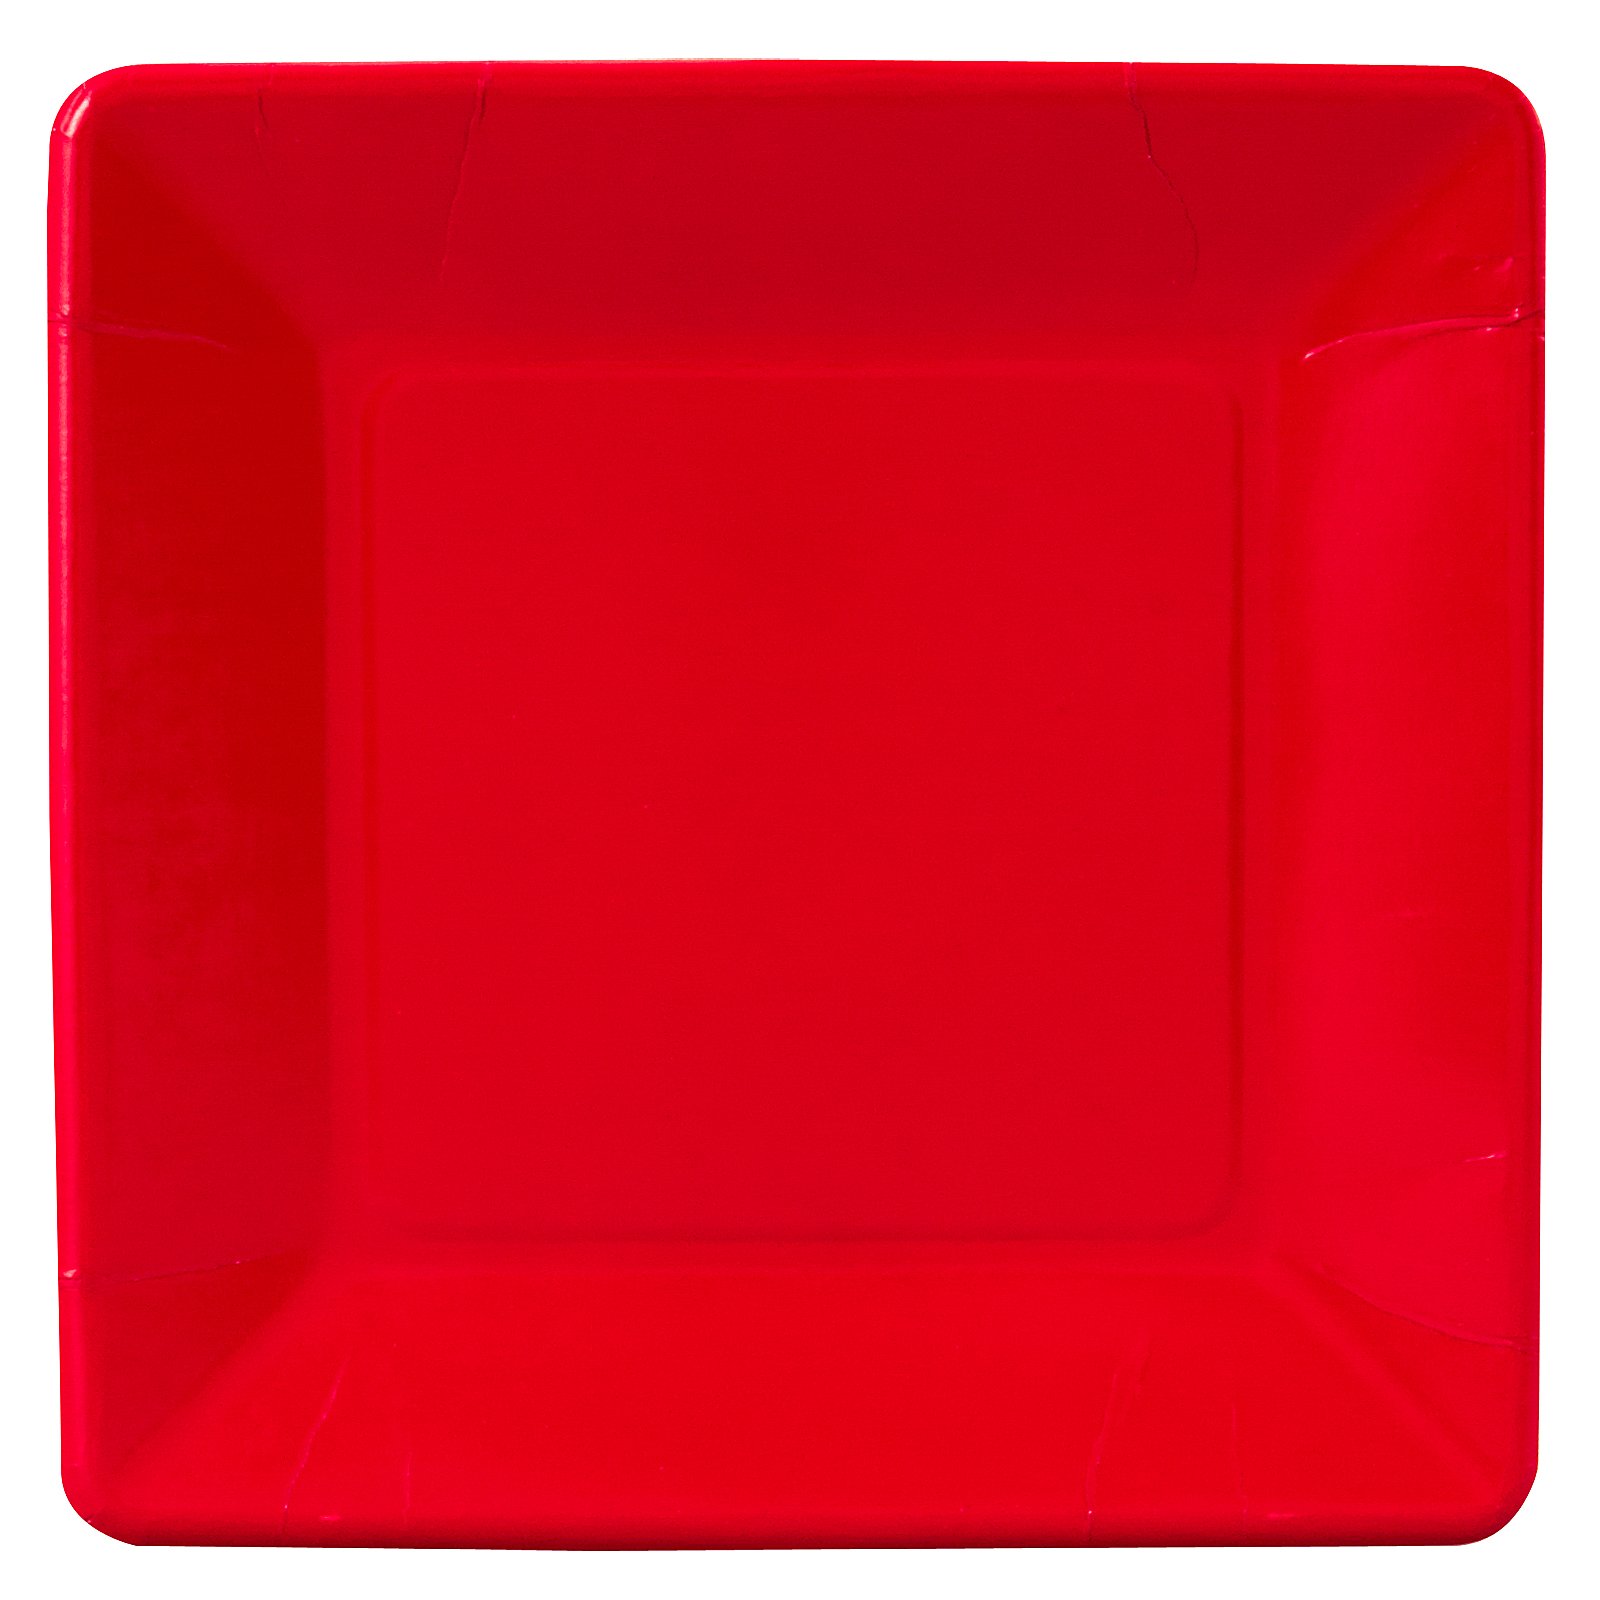 Classic Red (Red) Square Dinner Plates (18 count)